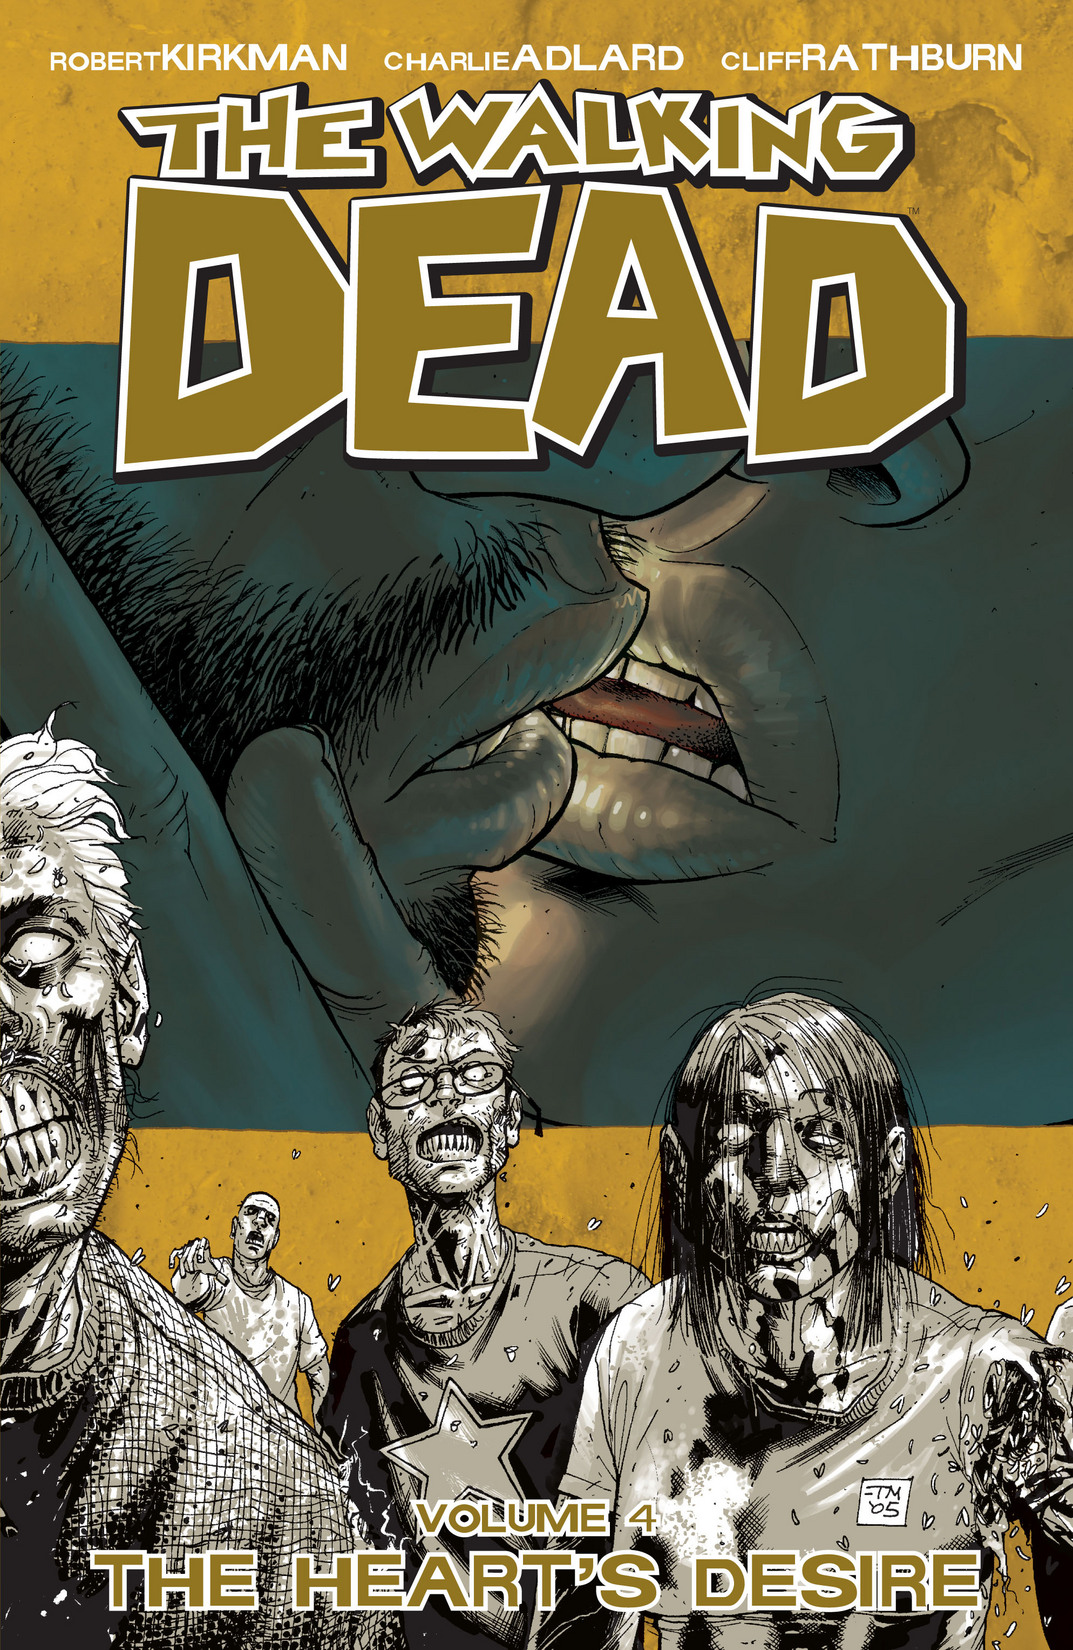 The Walking Dead Poster Collection Book Review 